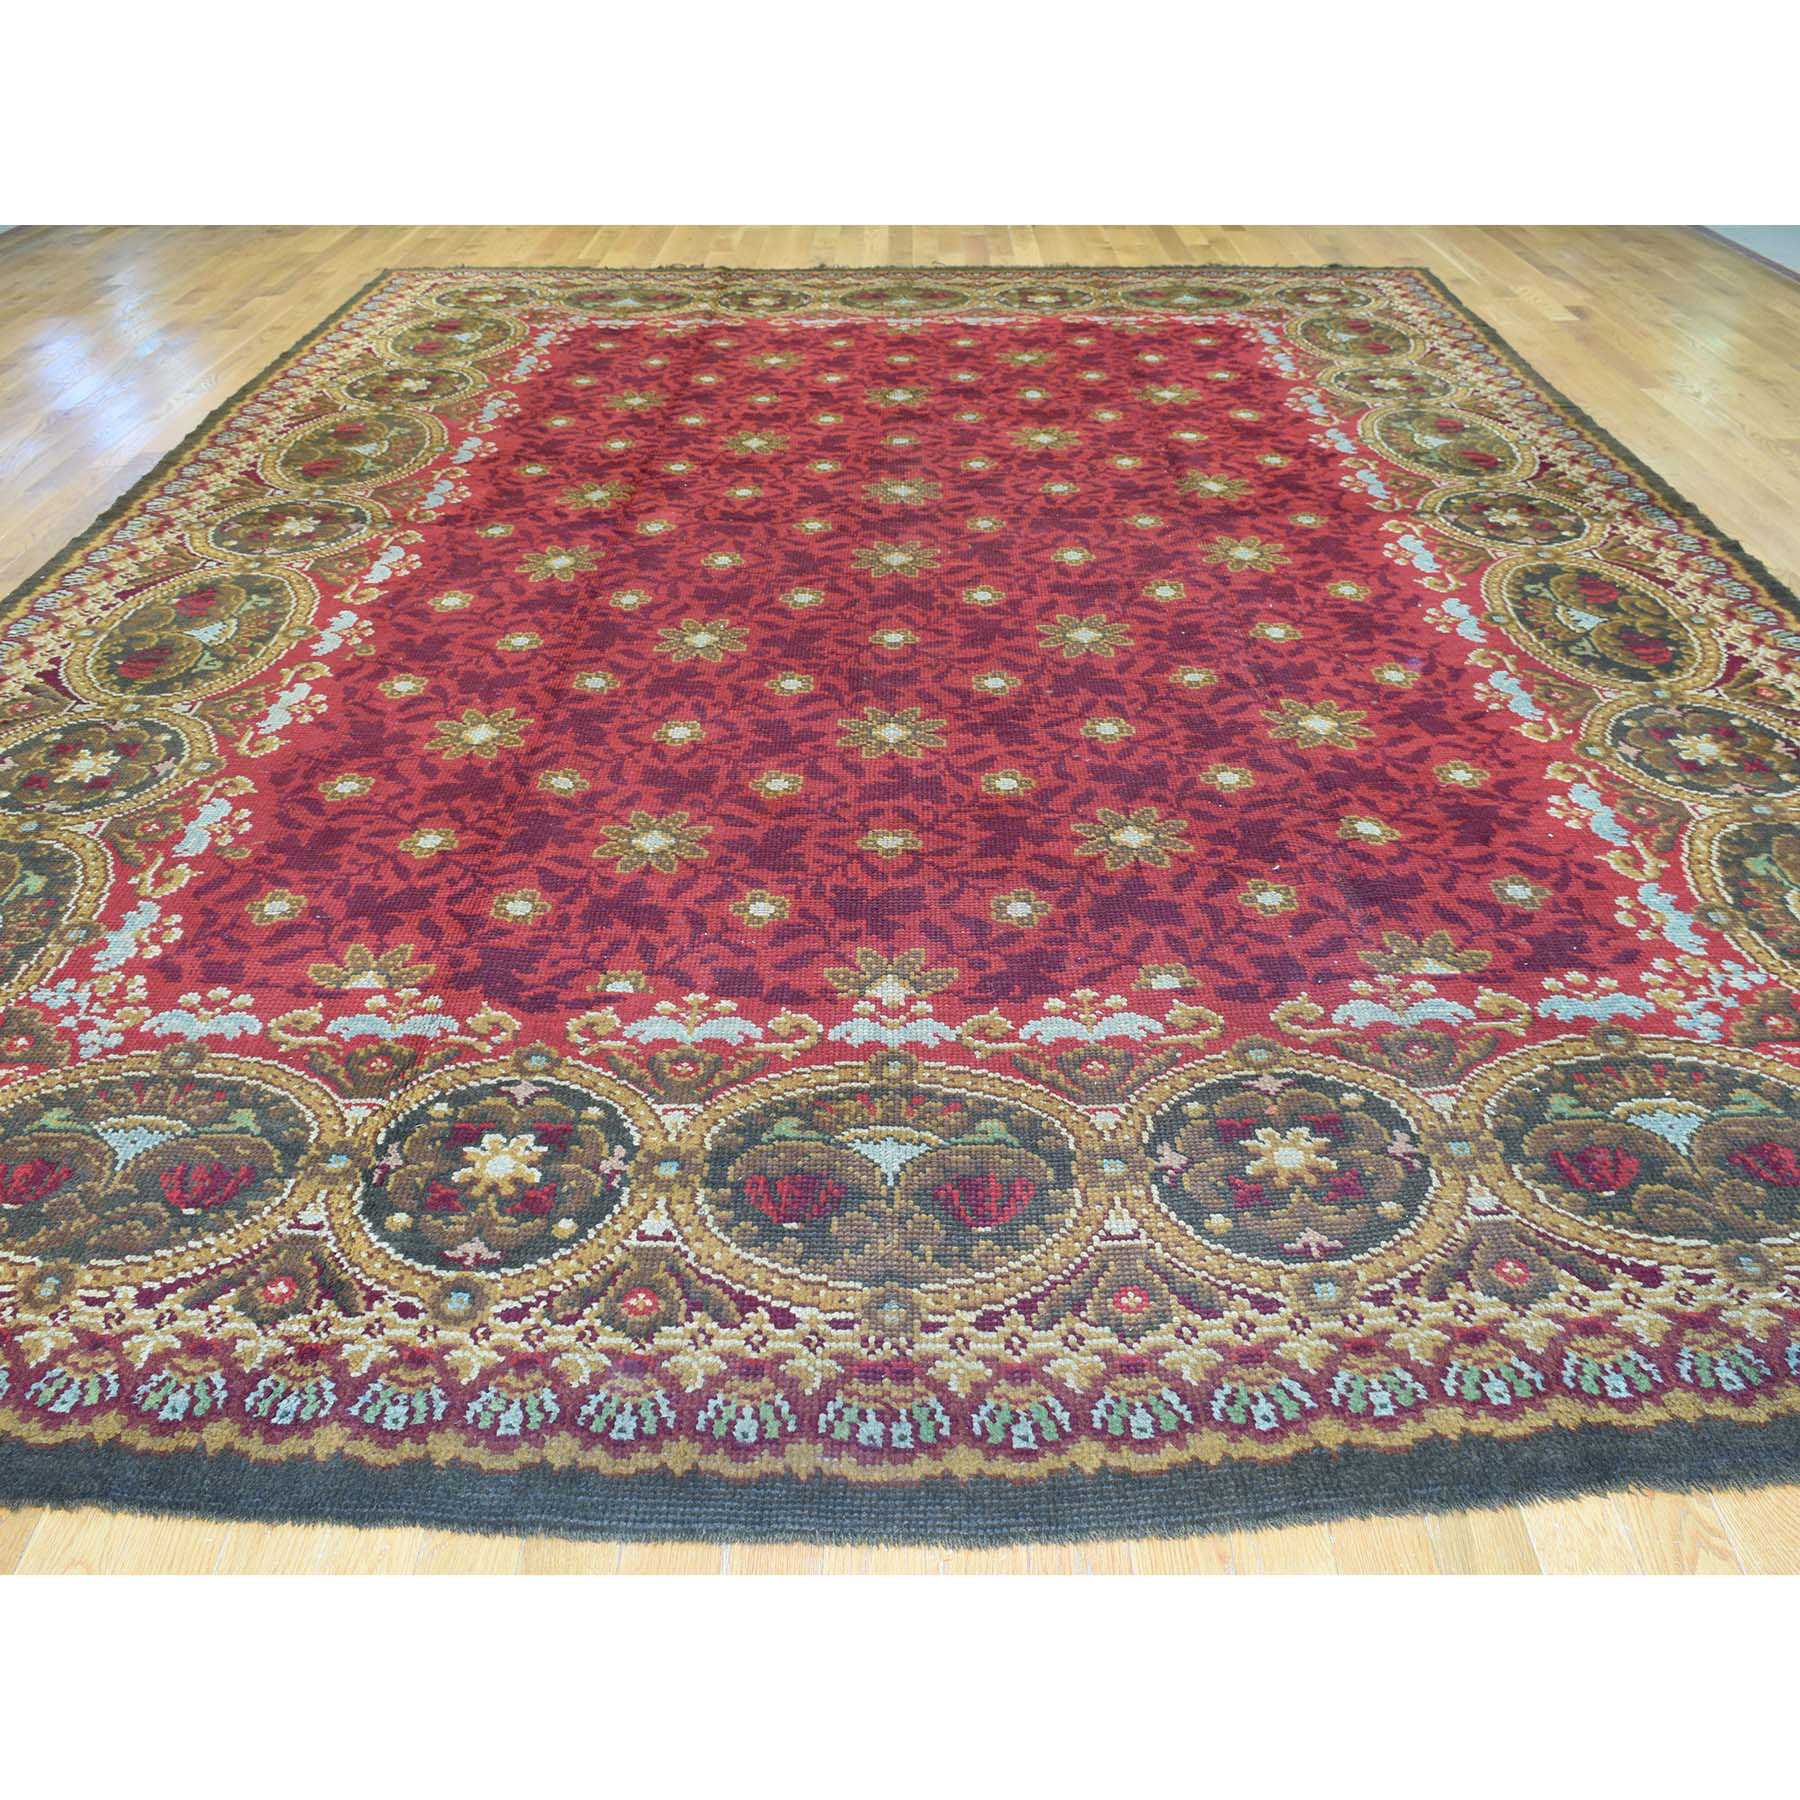 10'10"x14'5" Antique European Donegal Pure Wool Oversize Oriental Rug 